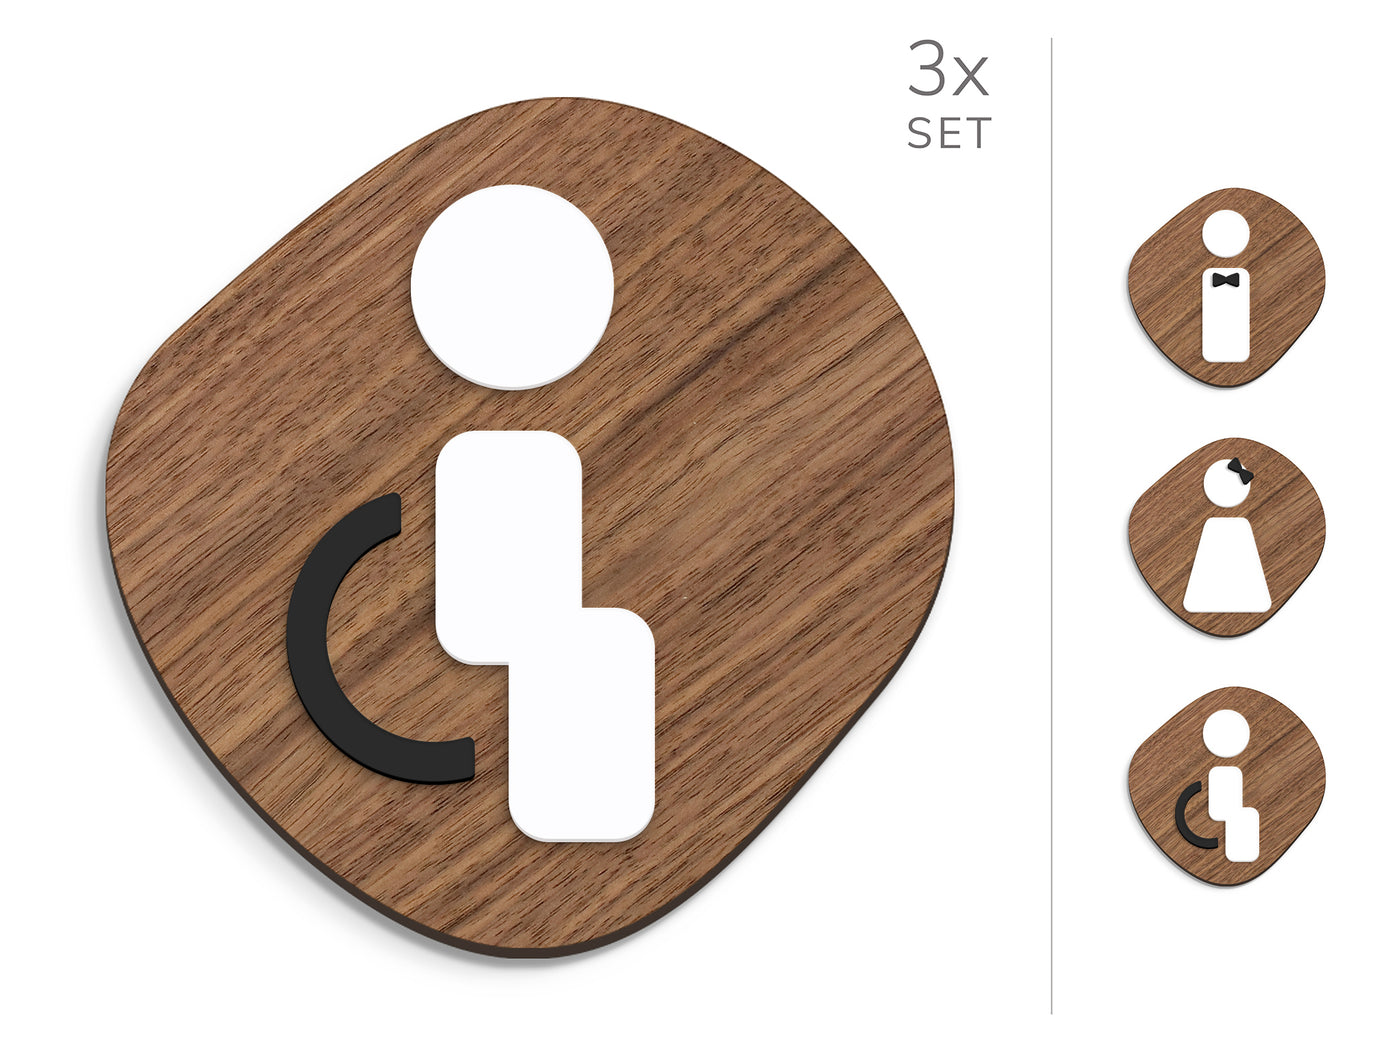 Styled knot, 3x Stone shaped Base - Restroom Signs Set - Man, Woman, Disabled